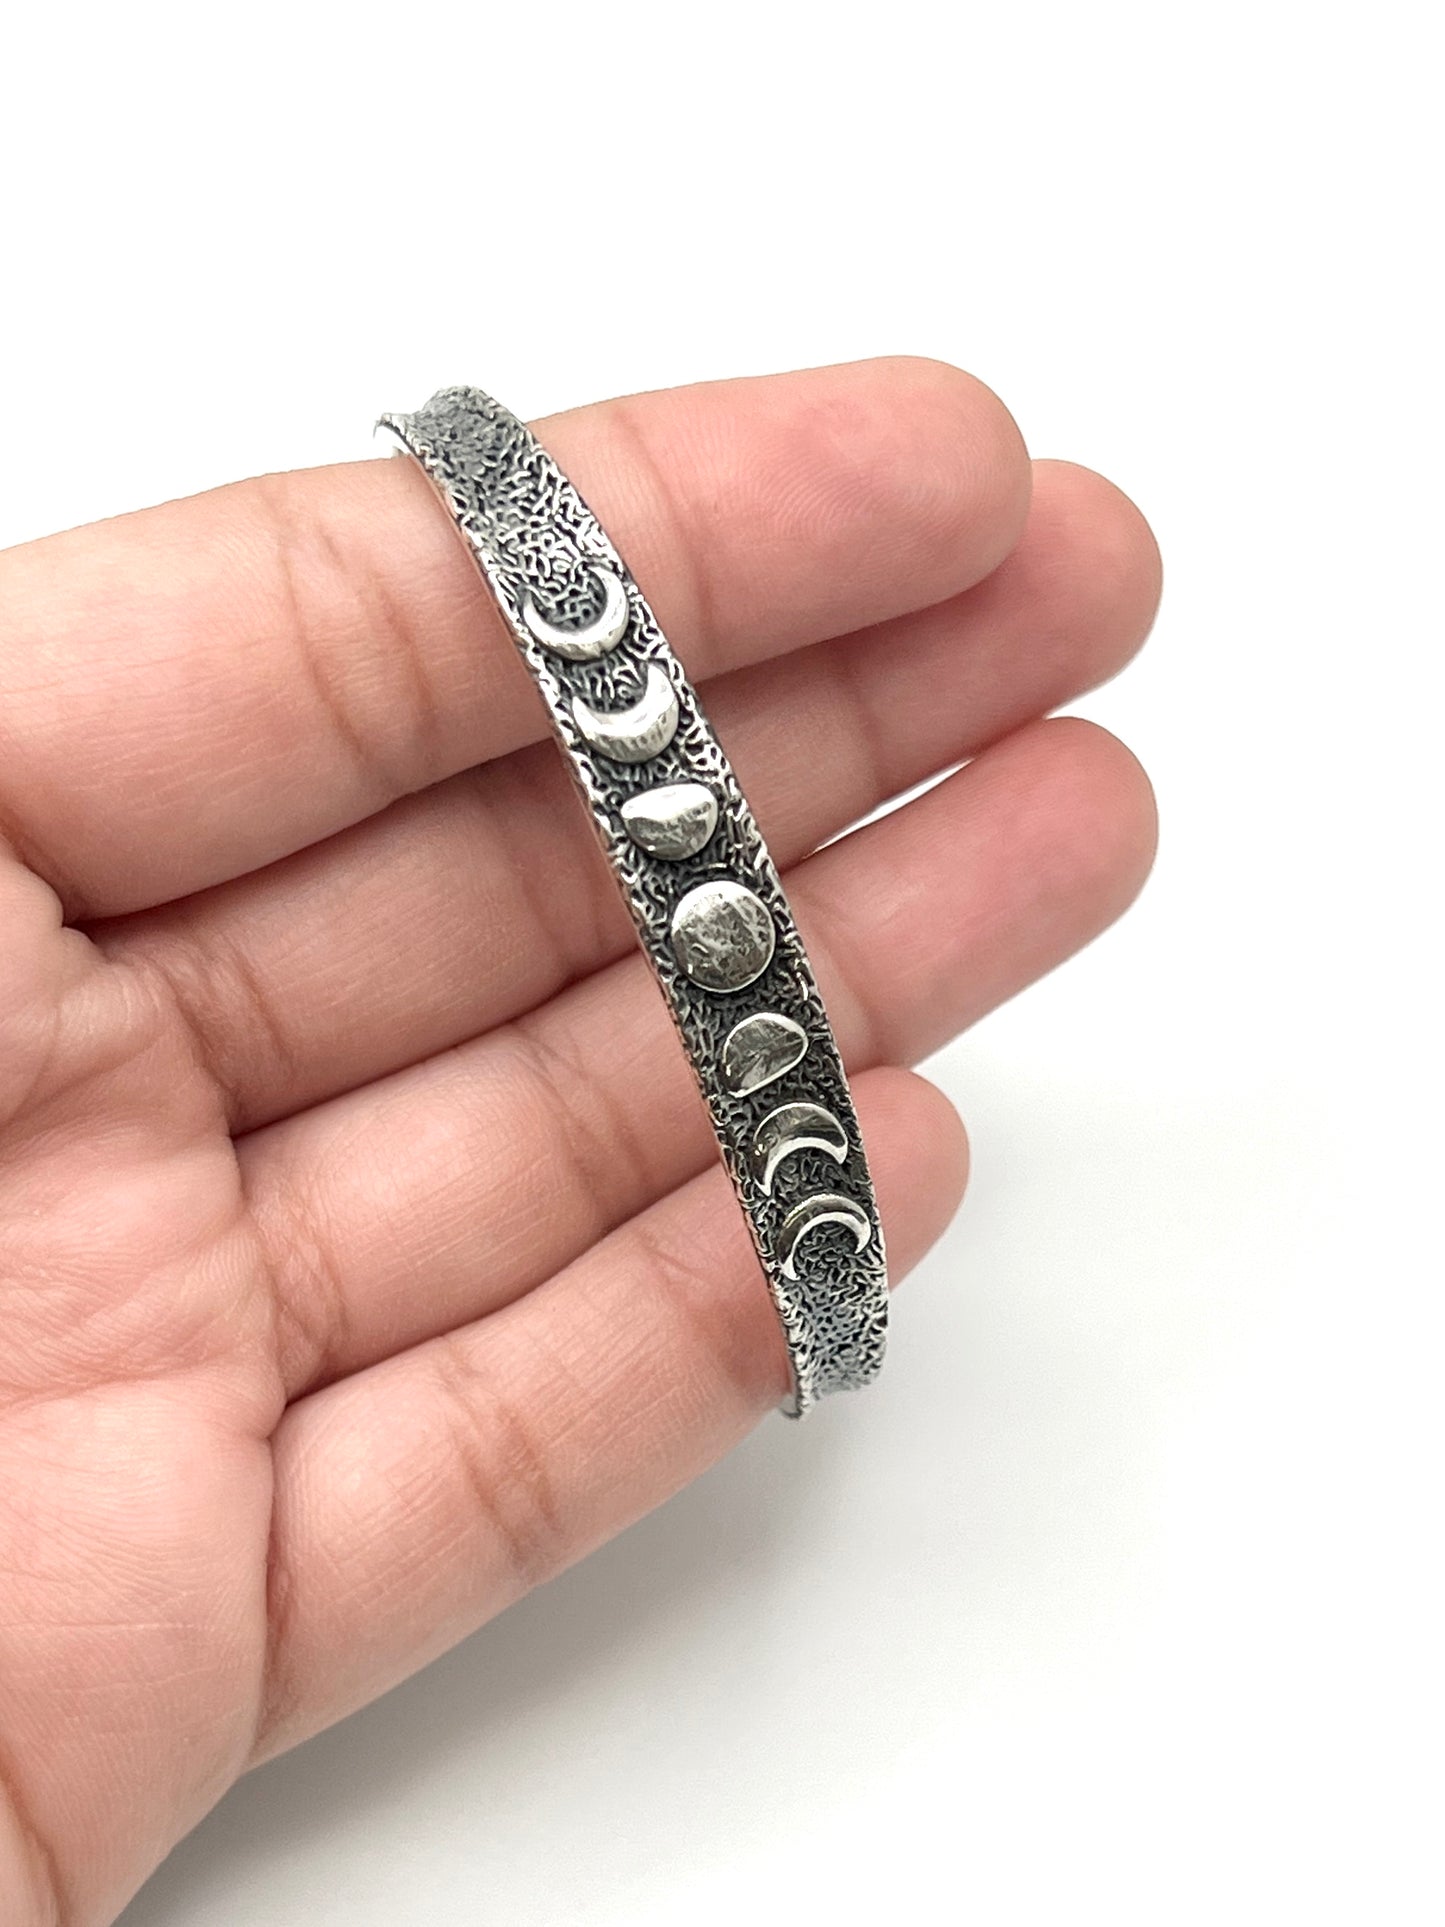 Oxidized Silver Moon Phases Cuff